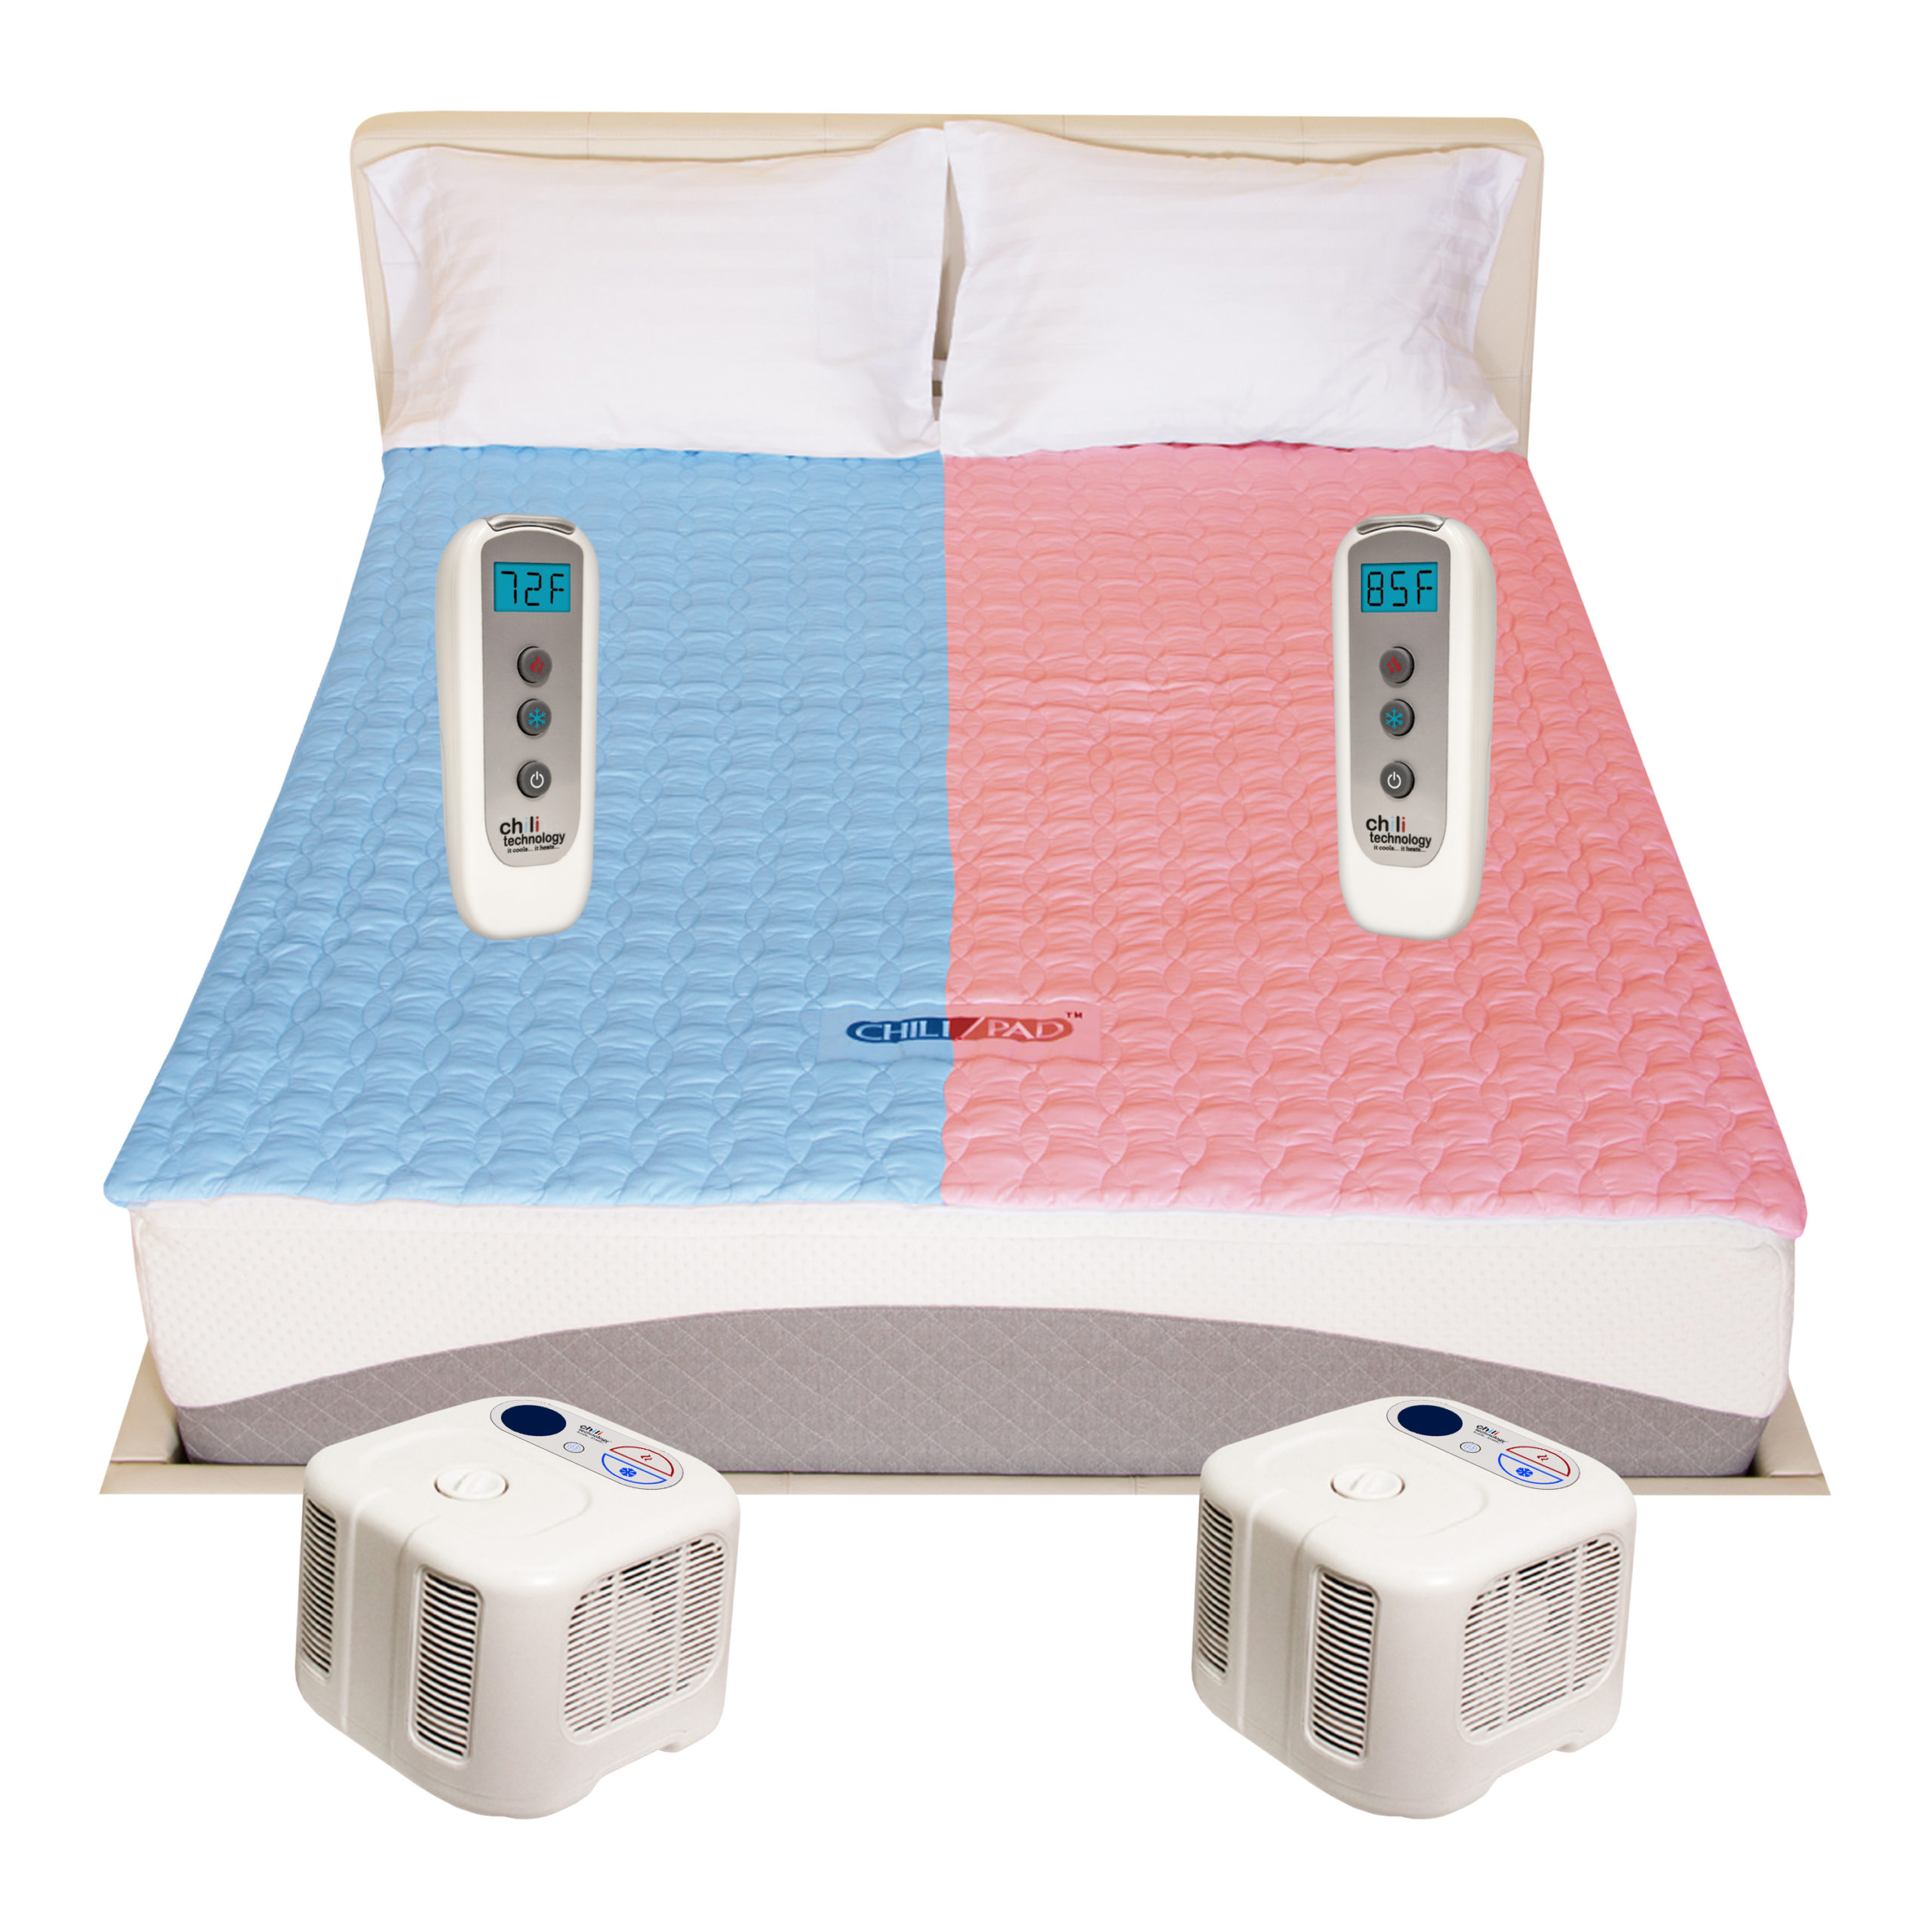 Select Comfort Hq - Chilipad|Temperature|Mattress|Cube|Sleep|Bed|Water|System|Pad|Ooler|Control|Unit|Night|Bedjet|Technology|Side|Air|Product|Review|Body|Time|Degrees|Noise|Price|Pod|Tubes|Heat|Device|Cooling|Room|King|App|Features|Size|Cover|Sleepers|Sheets|Energy|Warranty|Quality|Mattress Pad|Control Unit|Cube Sleep System|Sleep Pod|Distilled Water|Remote Control|Sleep System|Desired Temperature|Water Tank|Chilipad Cube|Chili Technology|Deep Sleep|Pro Cover|Ooler Sleep System|Hydrogen Peroxide|Cool Mesh|Sleep Temperature|Fitted Sheet|Pod Pro|Sleep Quality|Smartphone App|Sleep Systems|Chilipad Sleep System|New Mattress|Sleep Trial|Full Refund|Mattress Topper|Body Heat|Air Flow|Chilipad Review